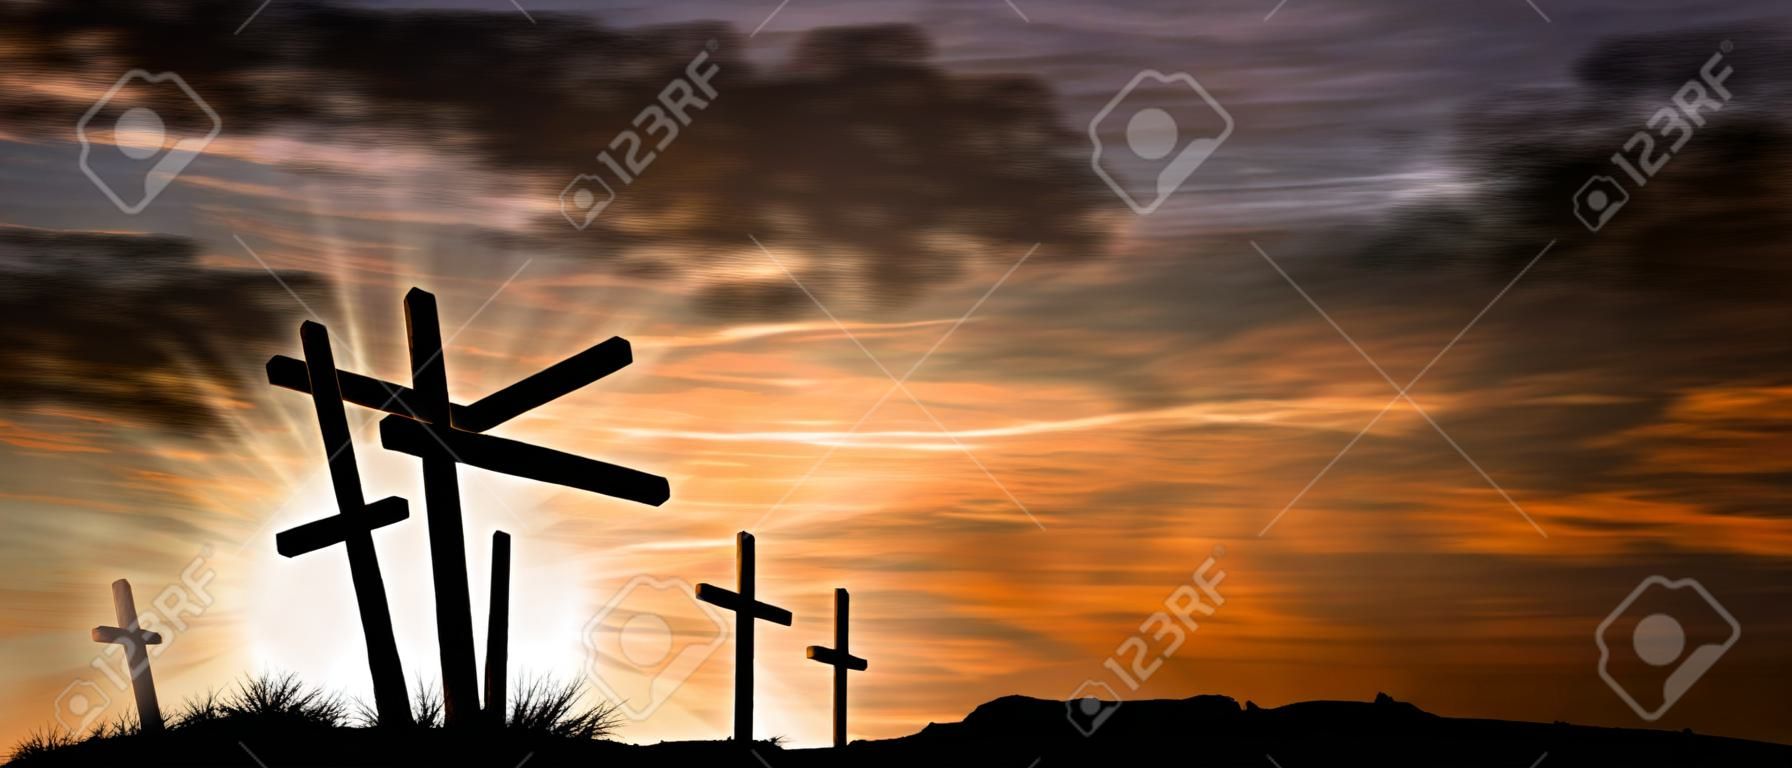 Silhouette of three wooden crosses above the hill with dramatic sky and sun rays at sunset. Religious symbol of good friday